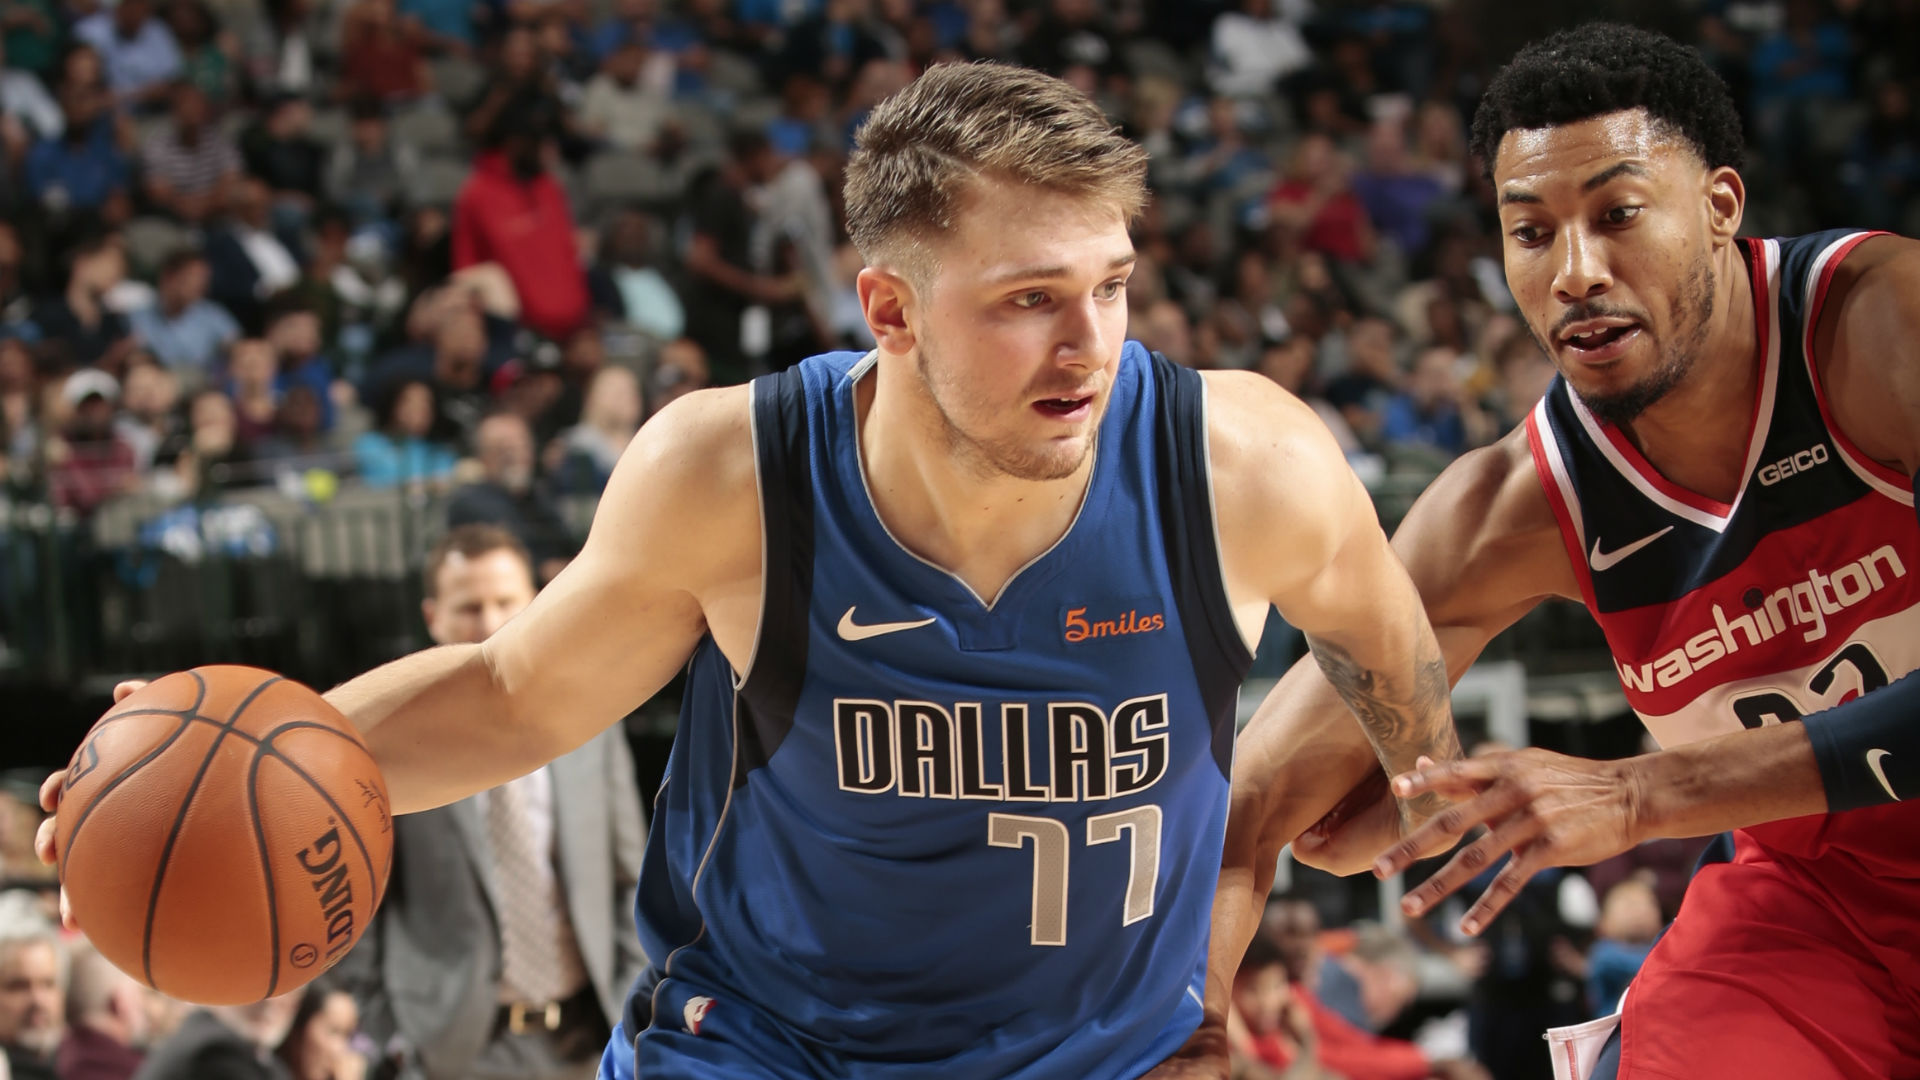 Heat Check: Does Luka Doncic deserve to be in the 2019 NBA All-Star Game? | NBA.com ...1920 x 1080